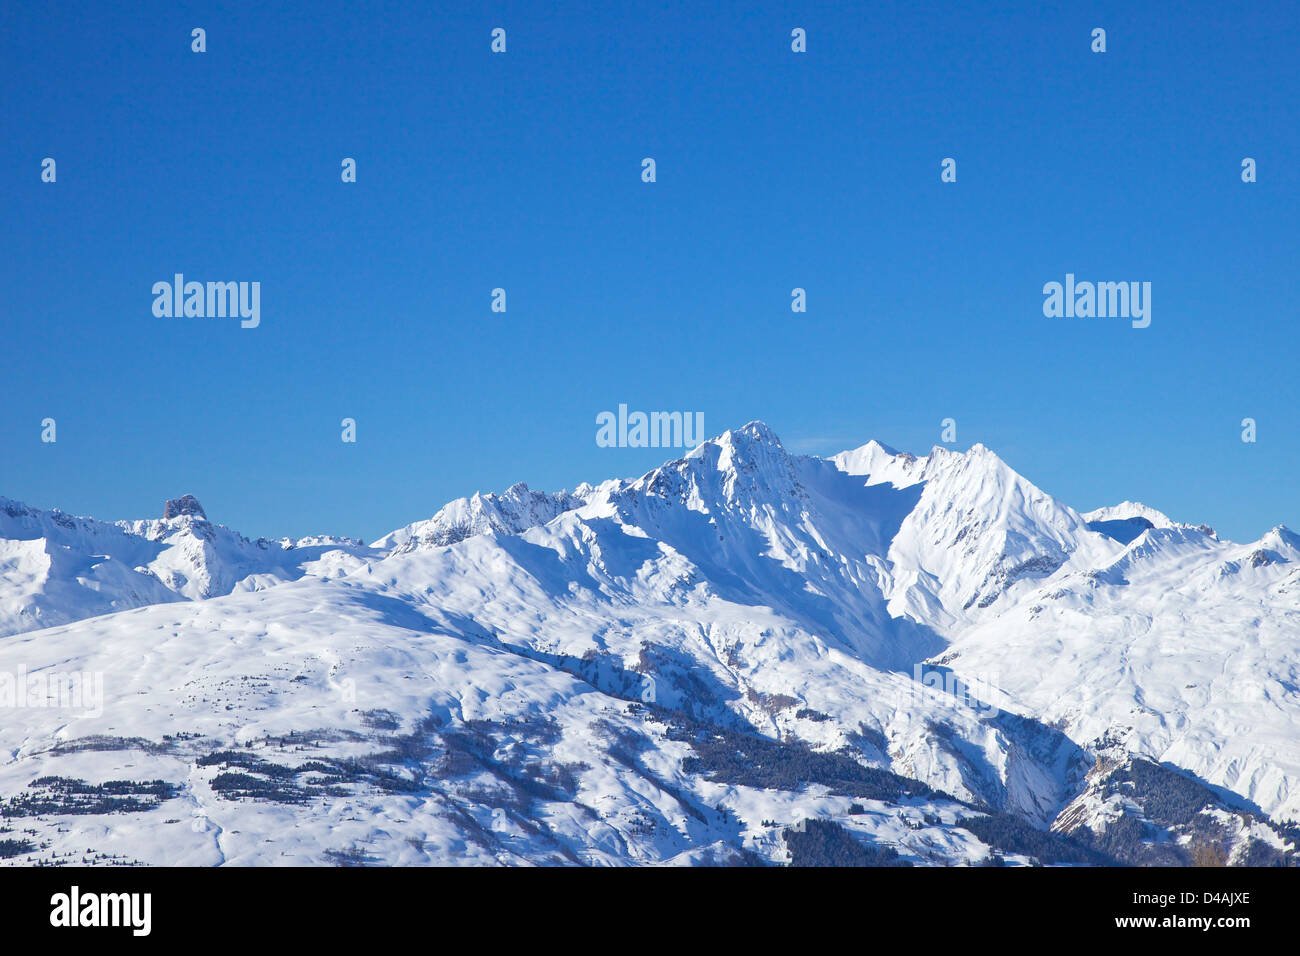 View of french alps from Les Coches, La Plagne, Savoie, France, Europe Stock Photo